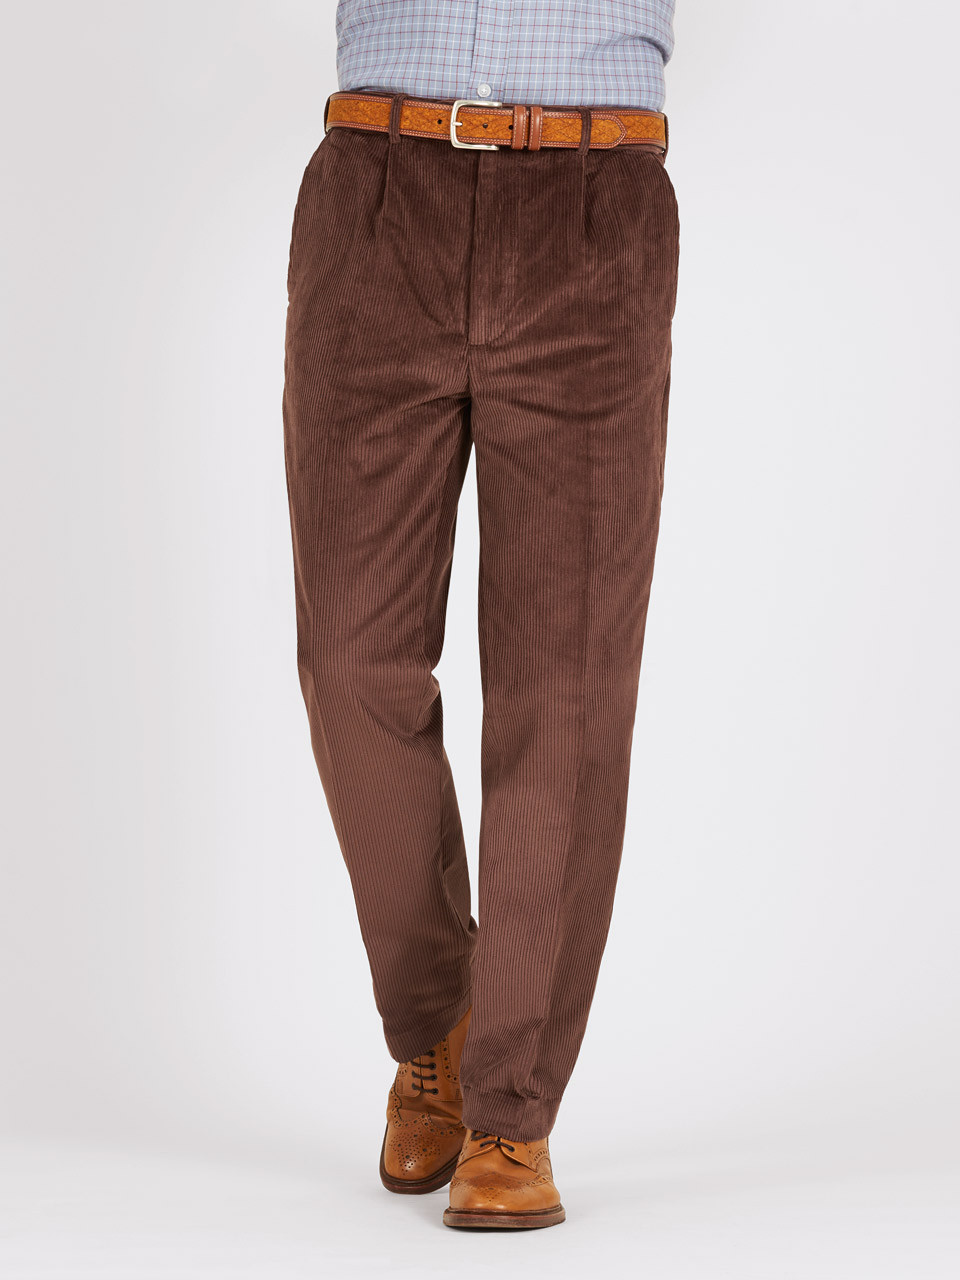 Khaki Cotton Drill Trousers  Mens Country Clothing  Cordings US